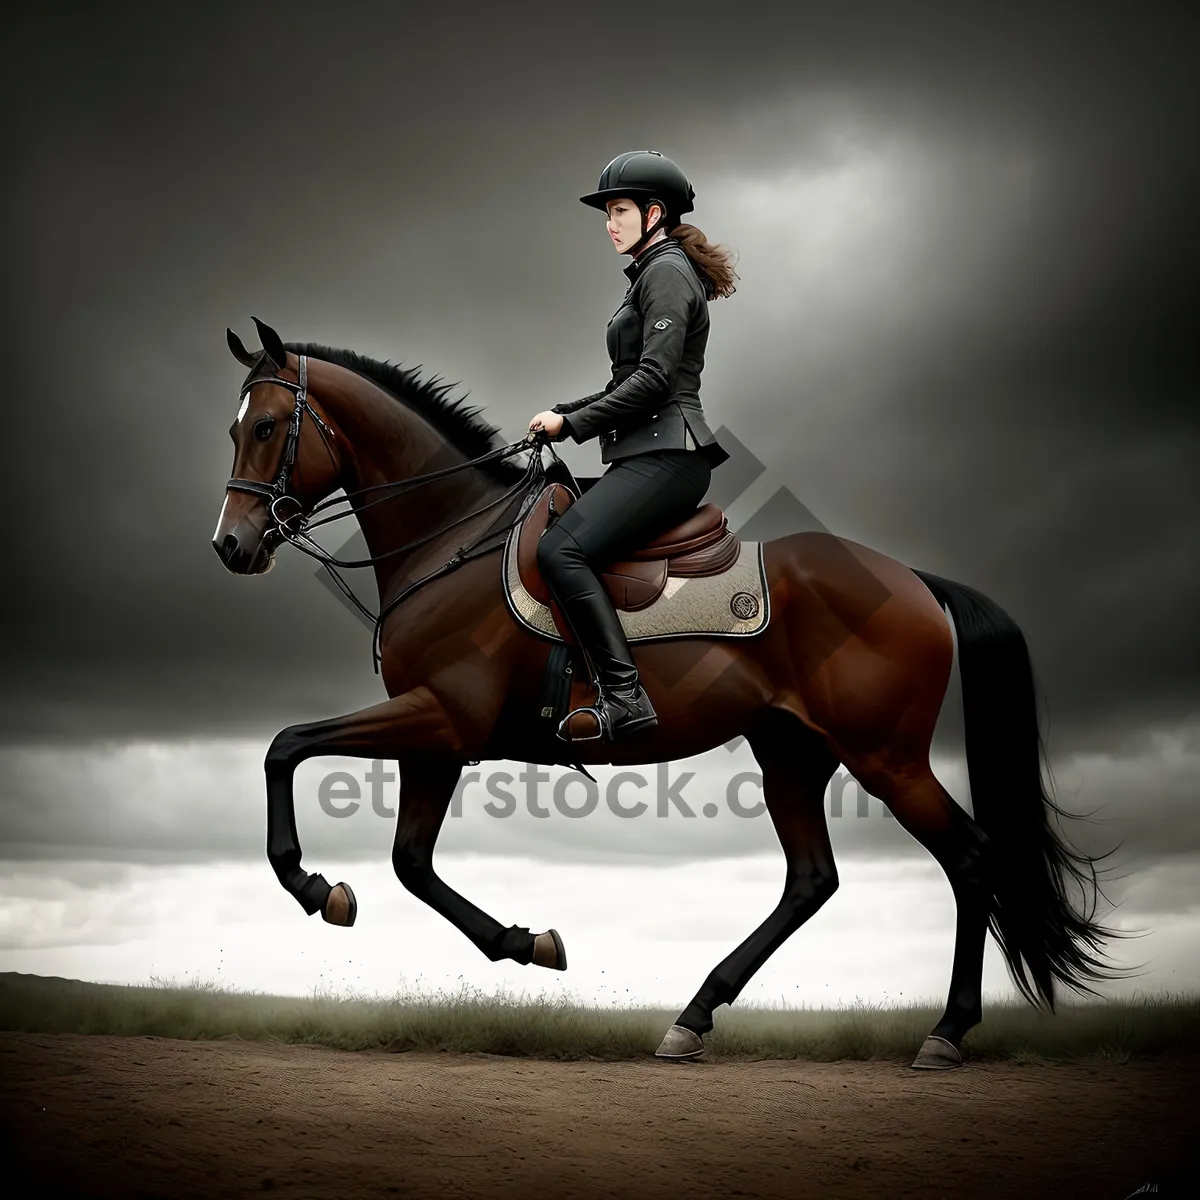 Picture of Equestrian Rider on Ranch Horseback